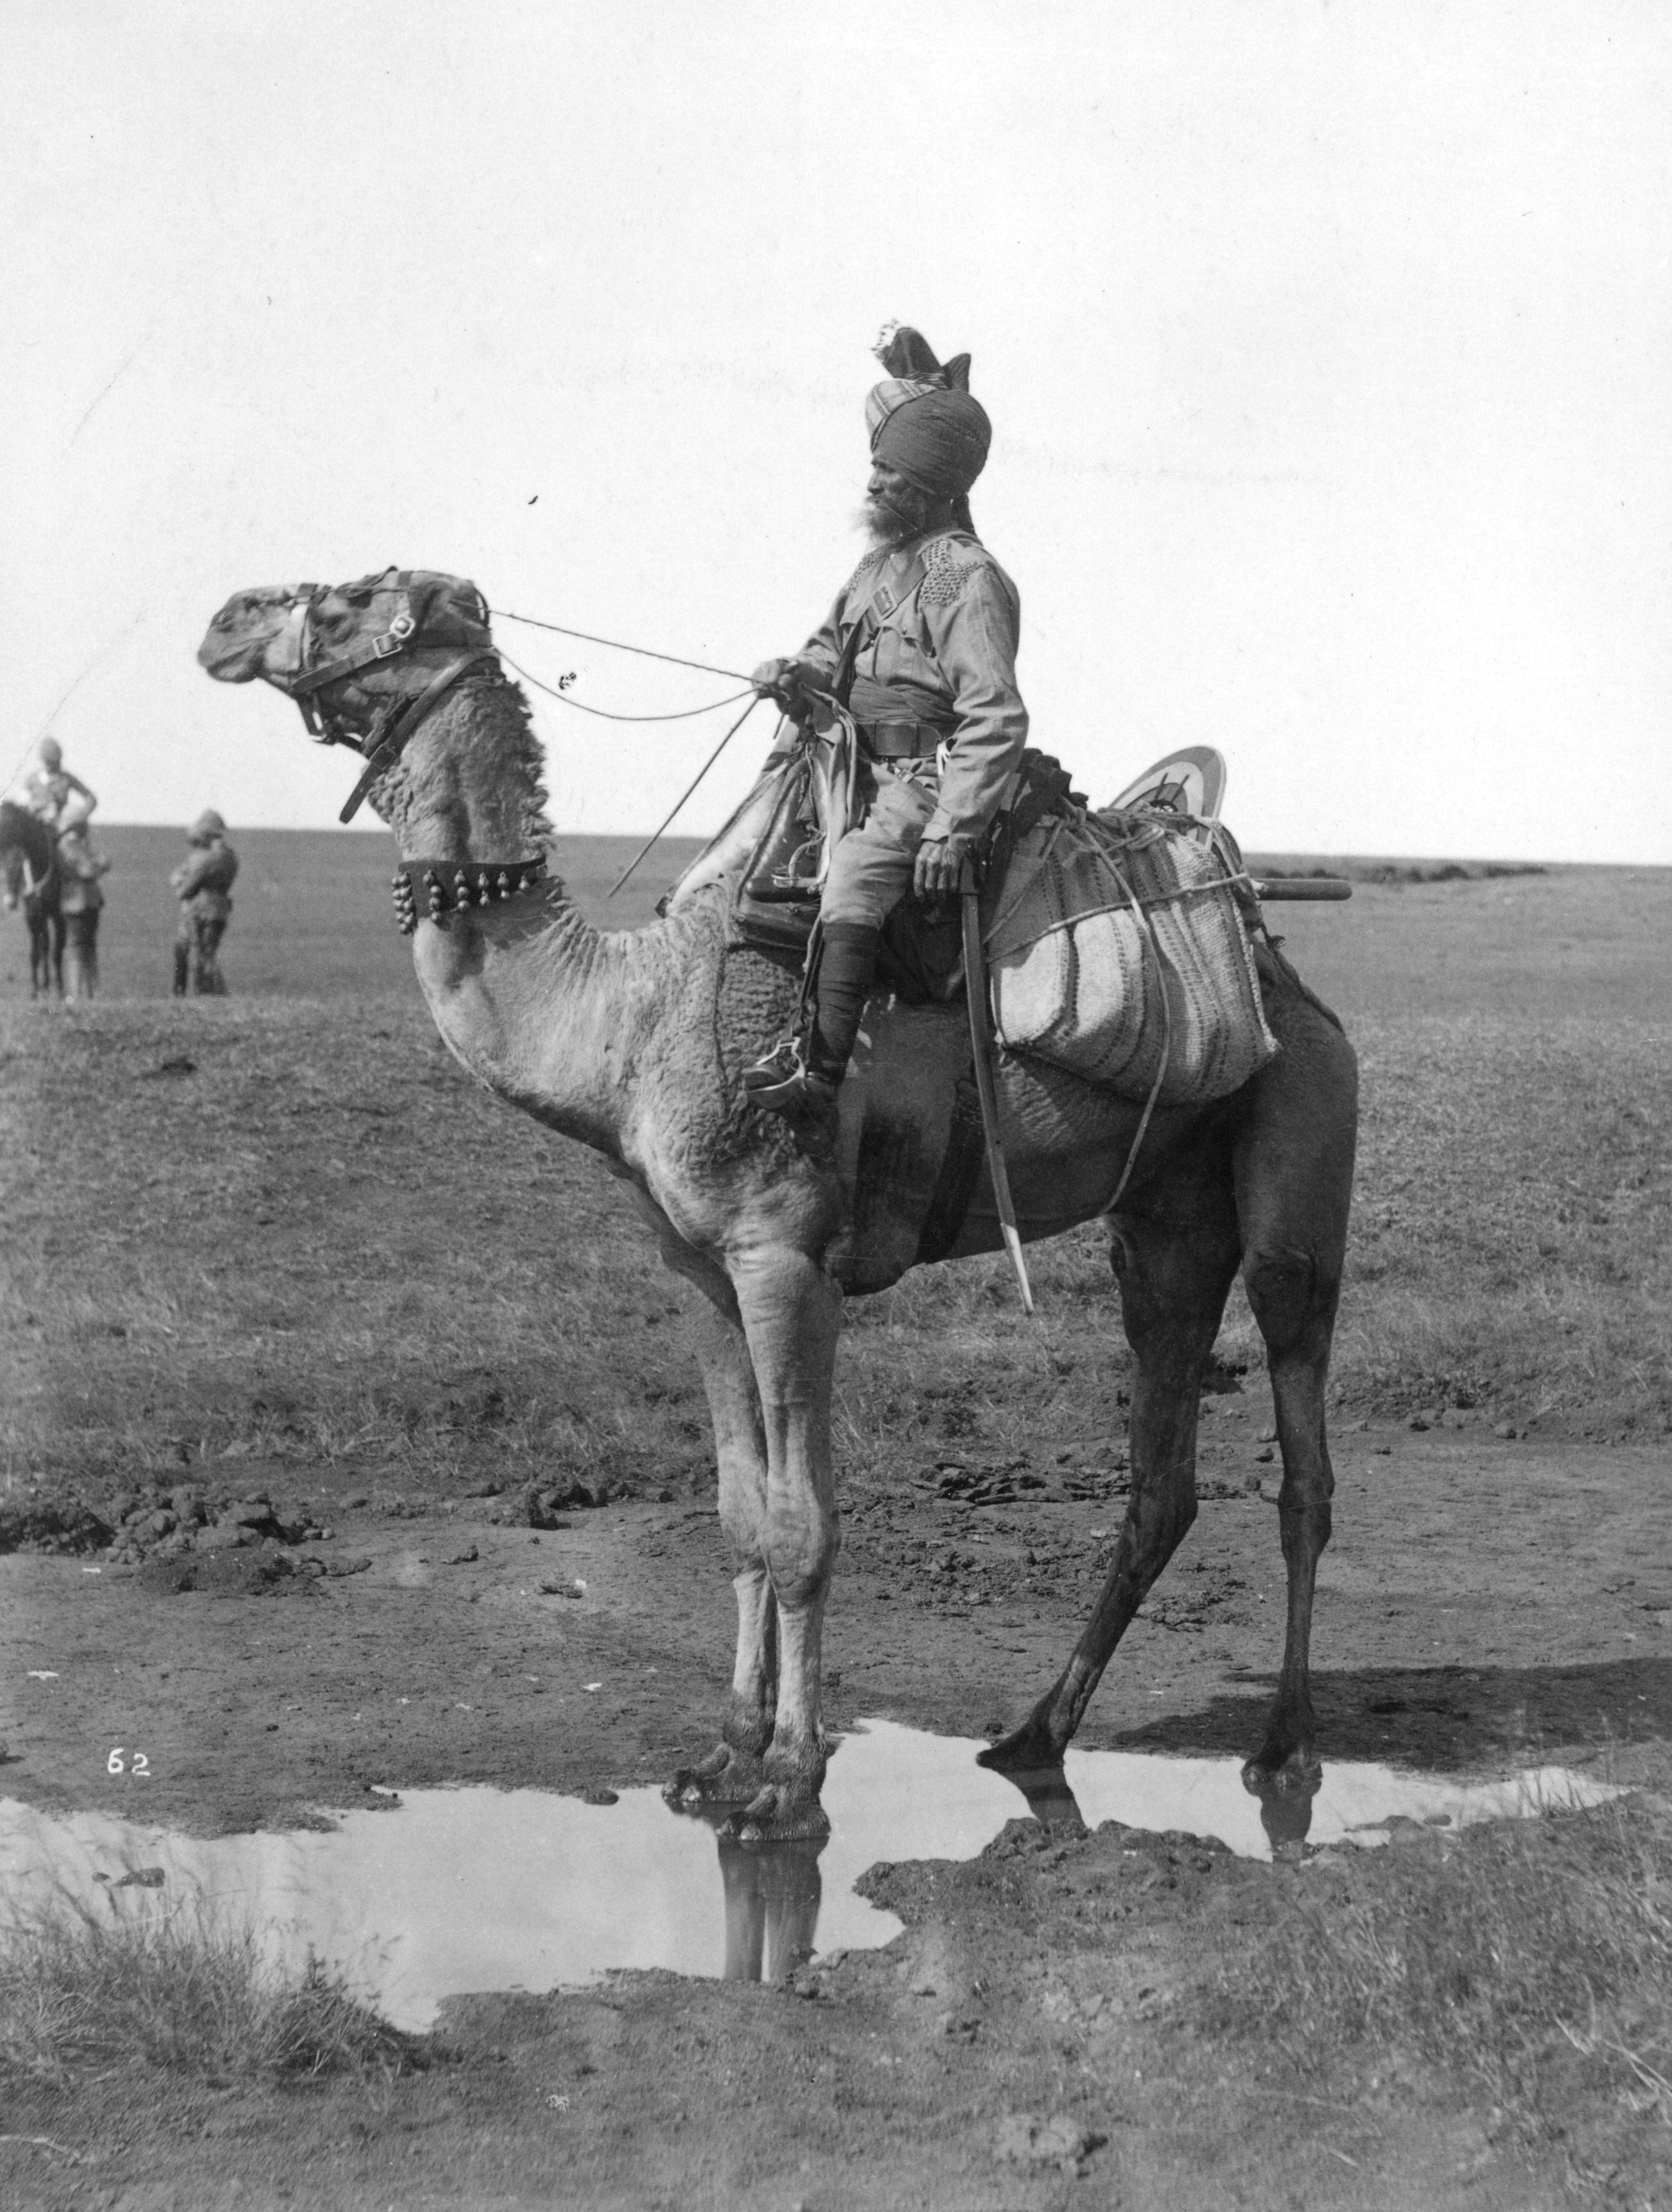 A Soldier in India in 1920.